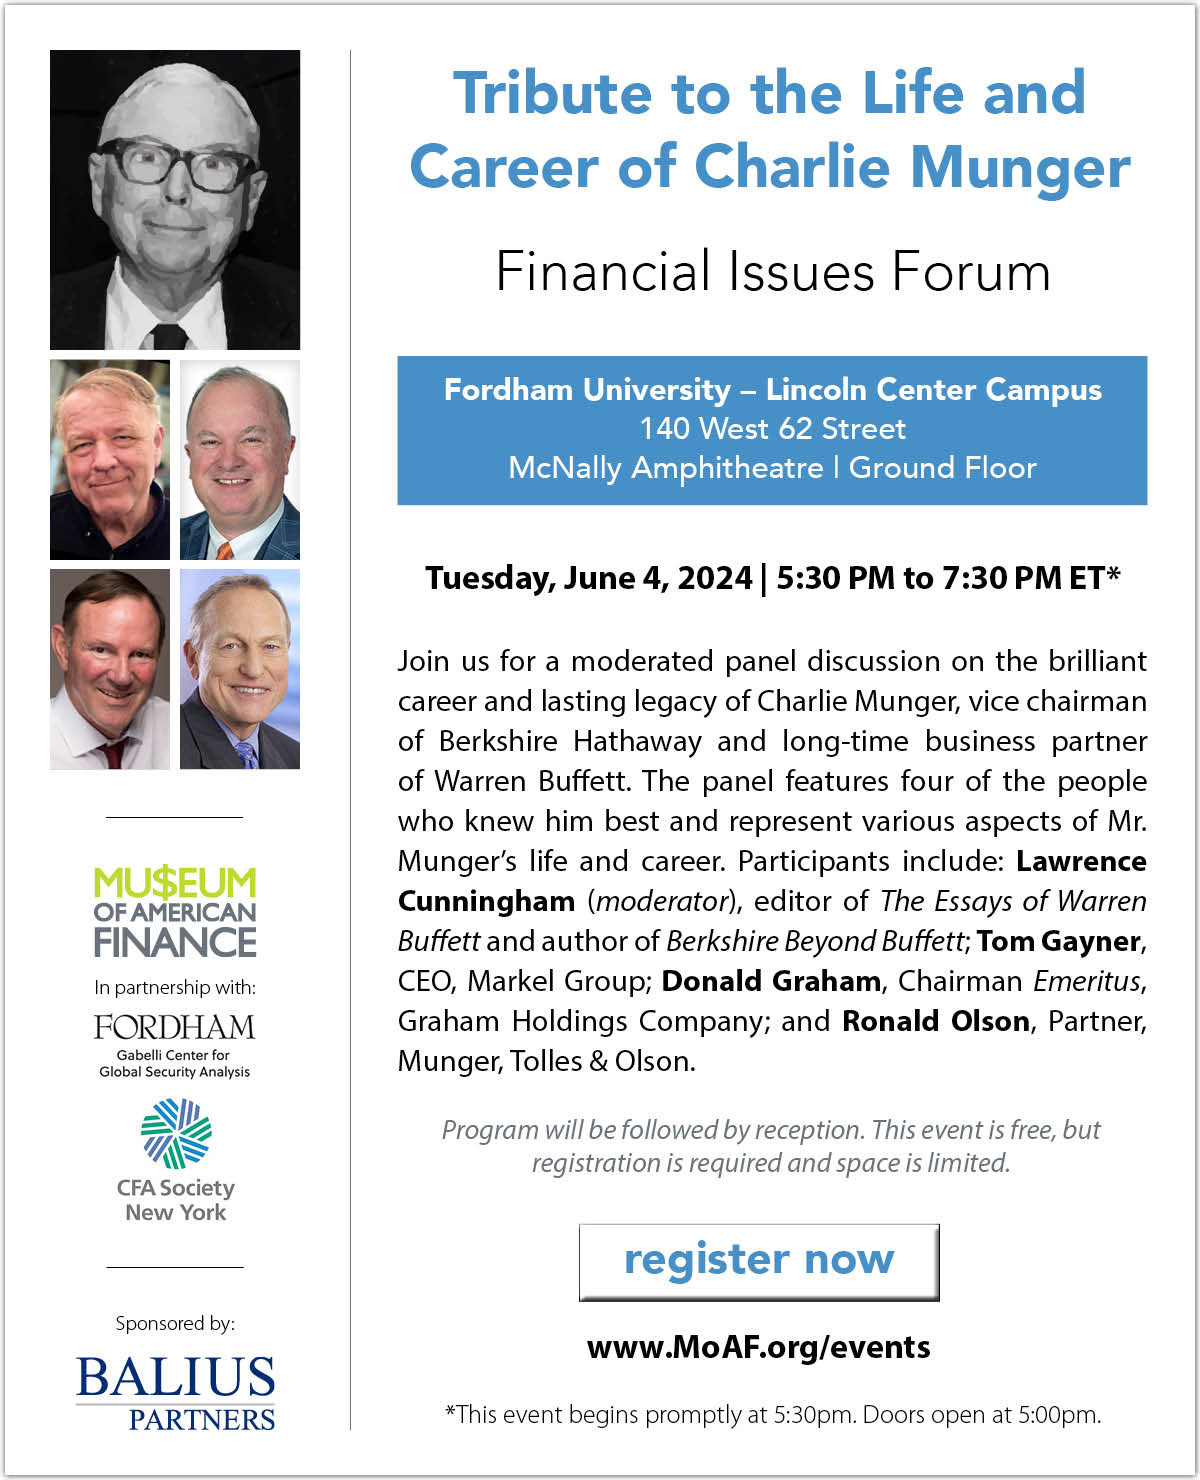 Tribute to the Life and Career of Charlie Munger